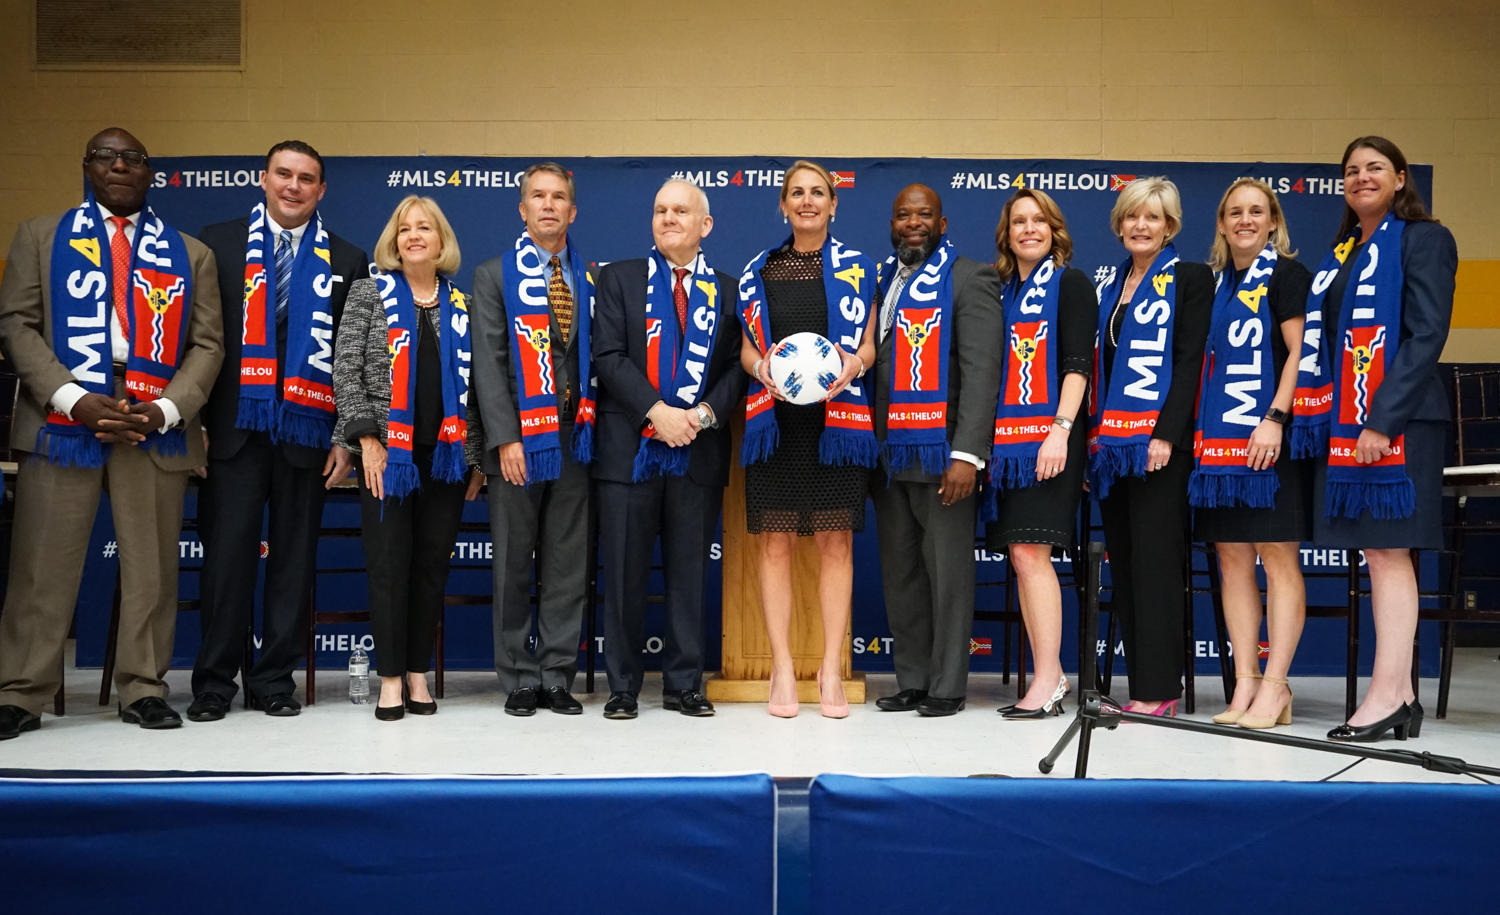 Second chance for pro soccer in St. Louis, as Enterprise owners back new bid for team | St ...